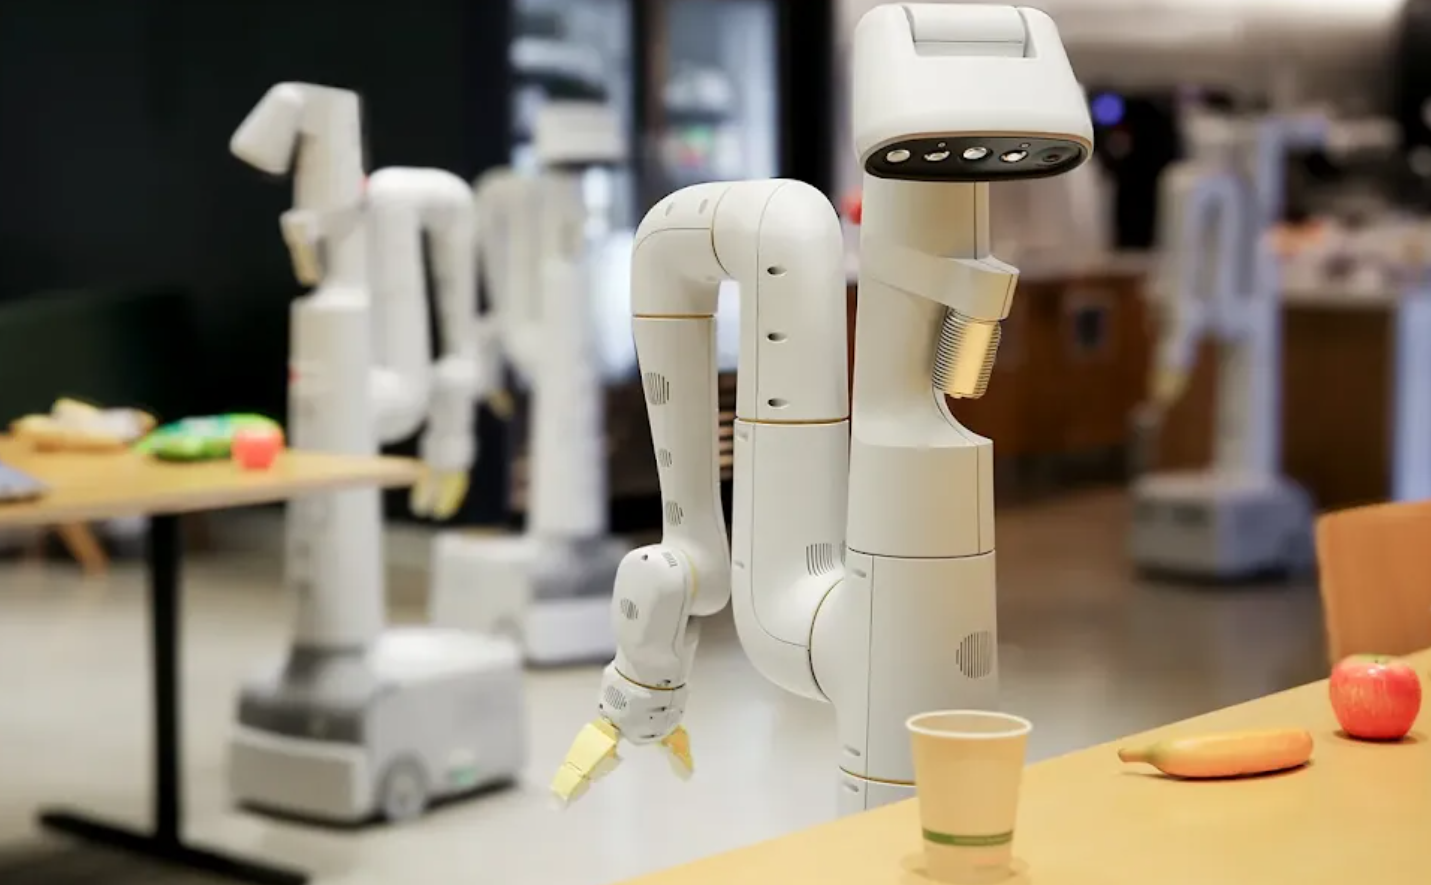 Google Deepmind shares its latest AI research for everyday robots